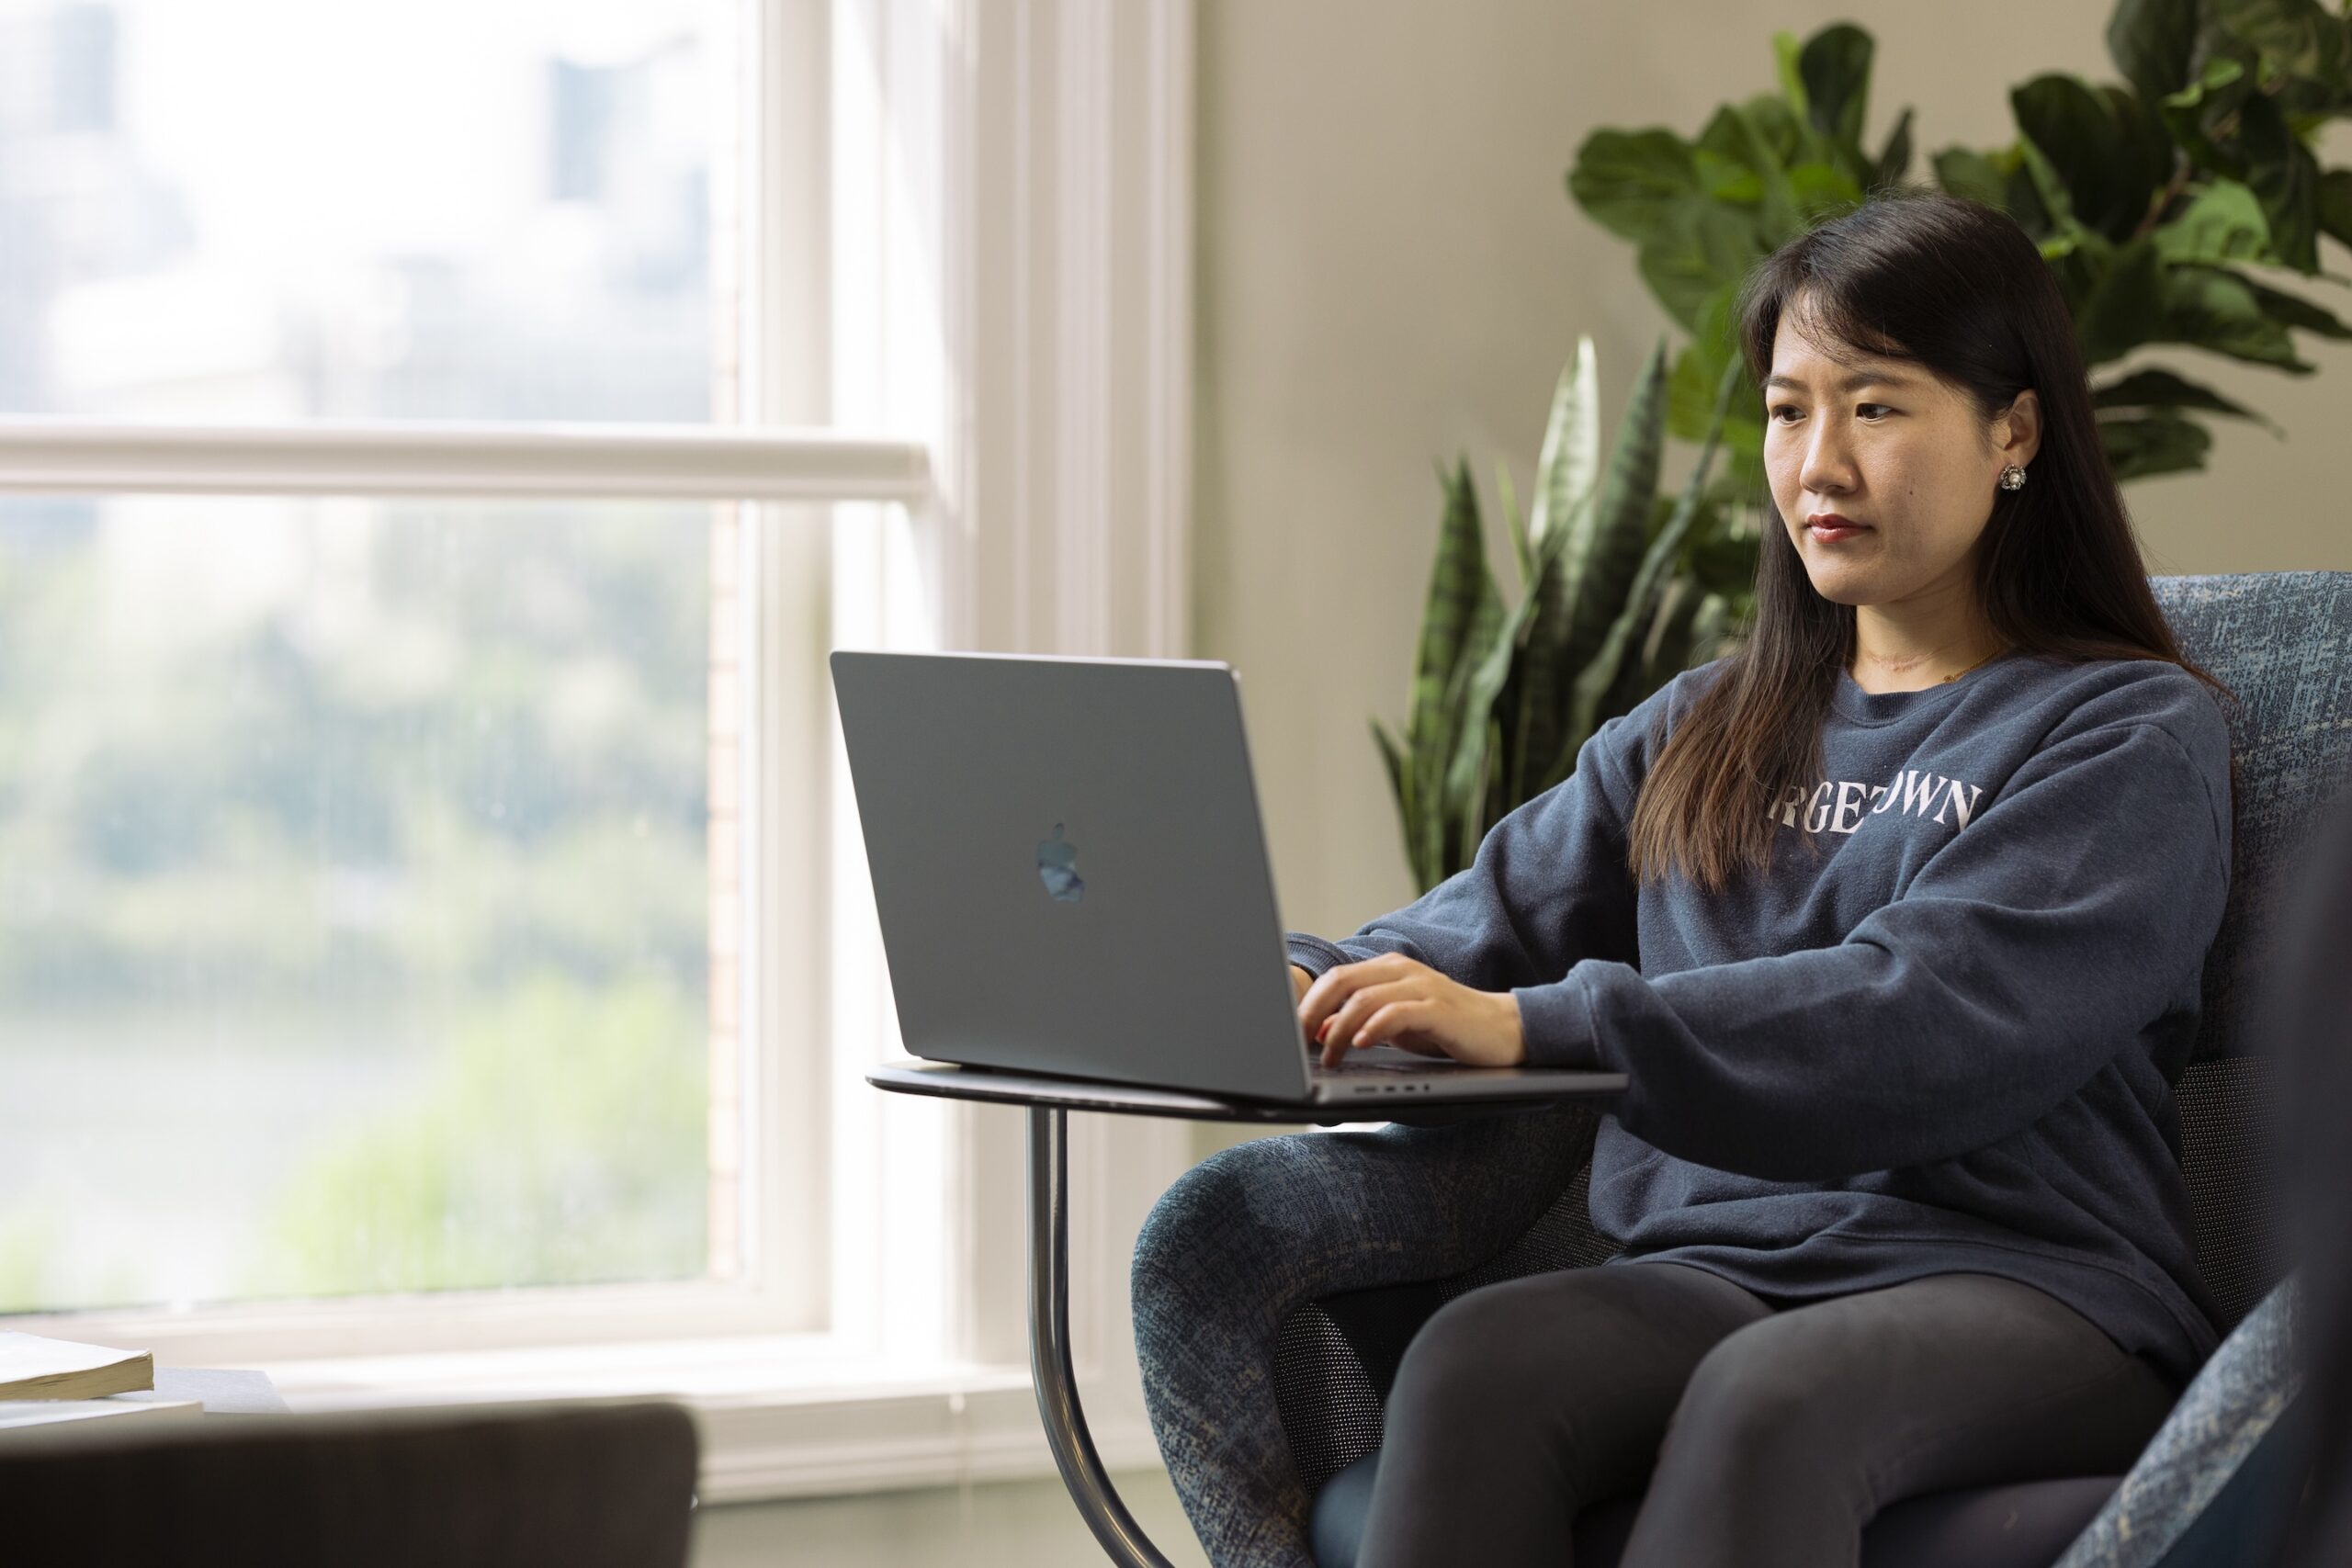 Woman wearing a navy blue Georgetown sweatshirt working on a laptop with a plant and a window in the background